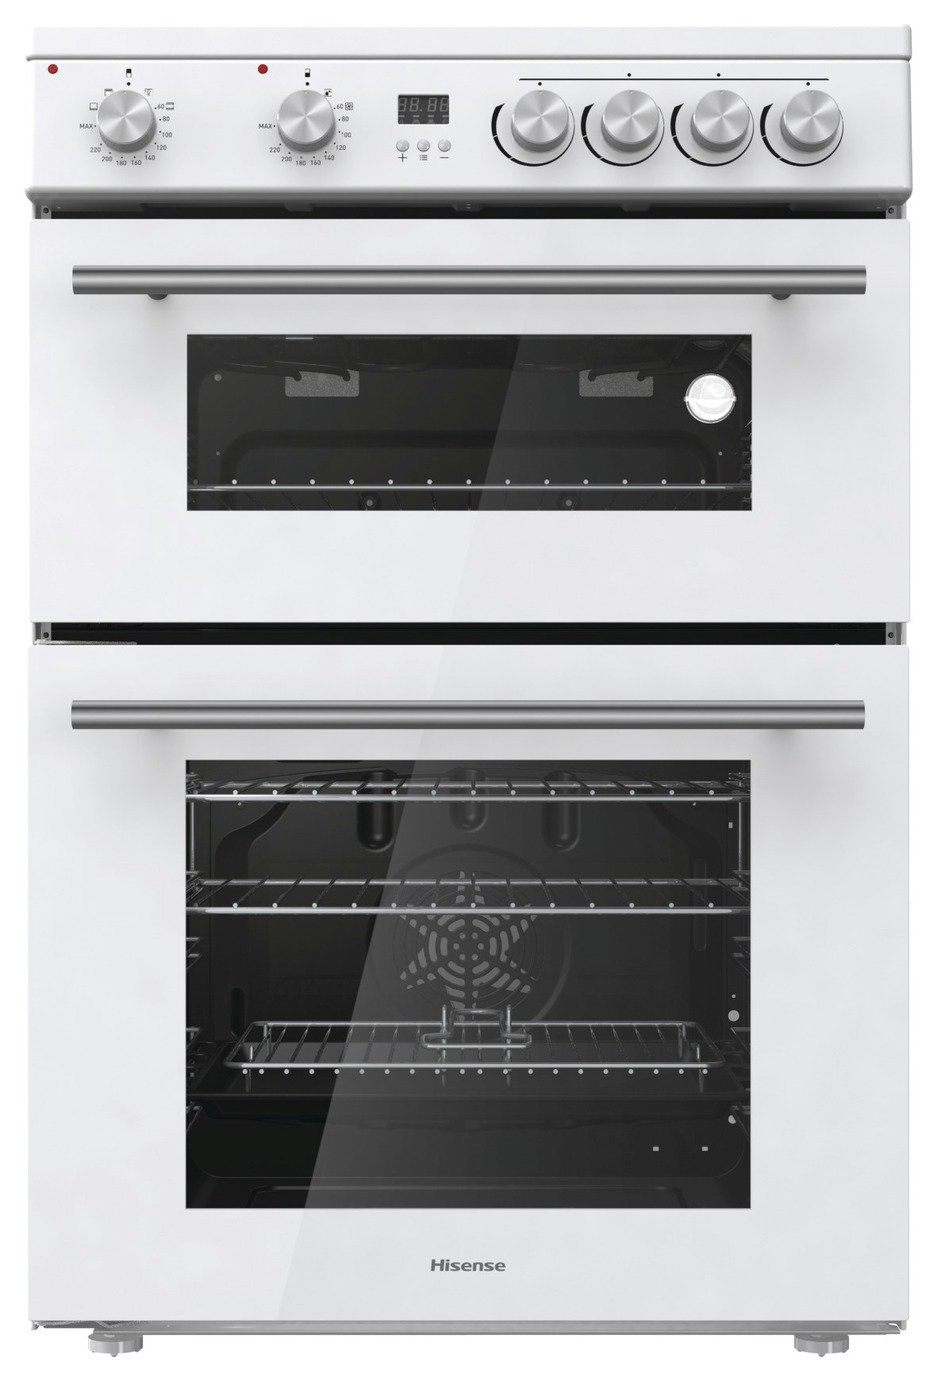 Hisense HDE3211BWUK 60cm Double Oven Electric Cooker - White